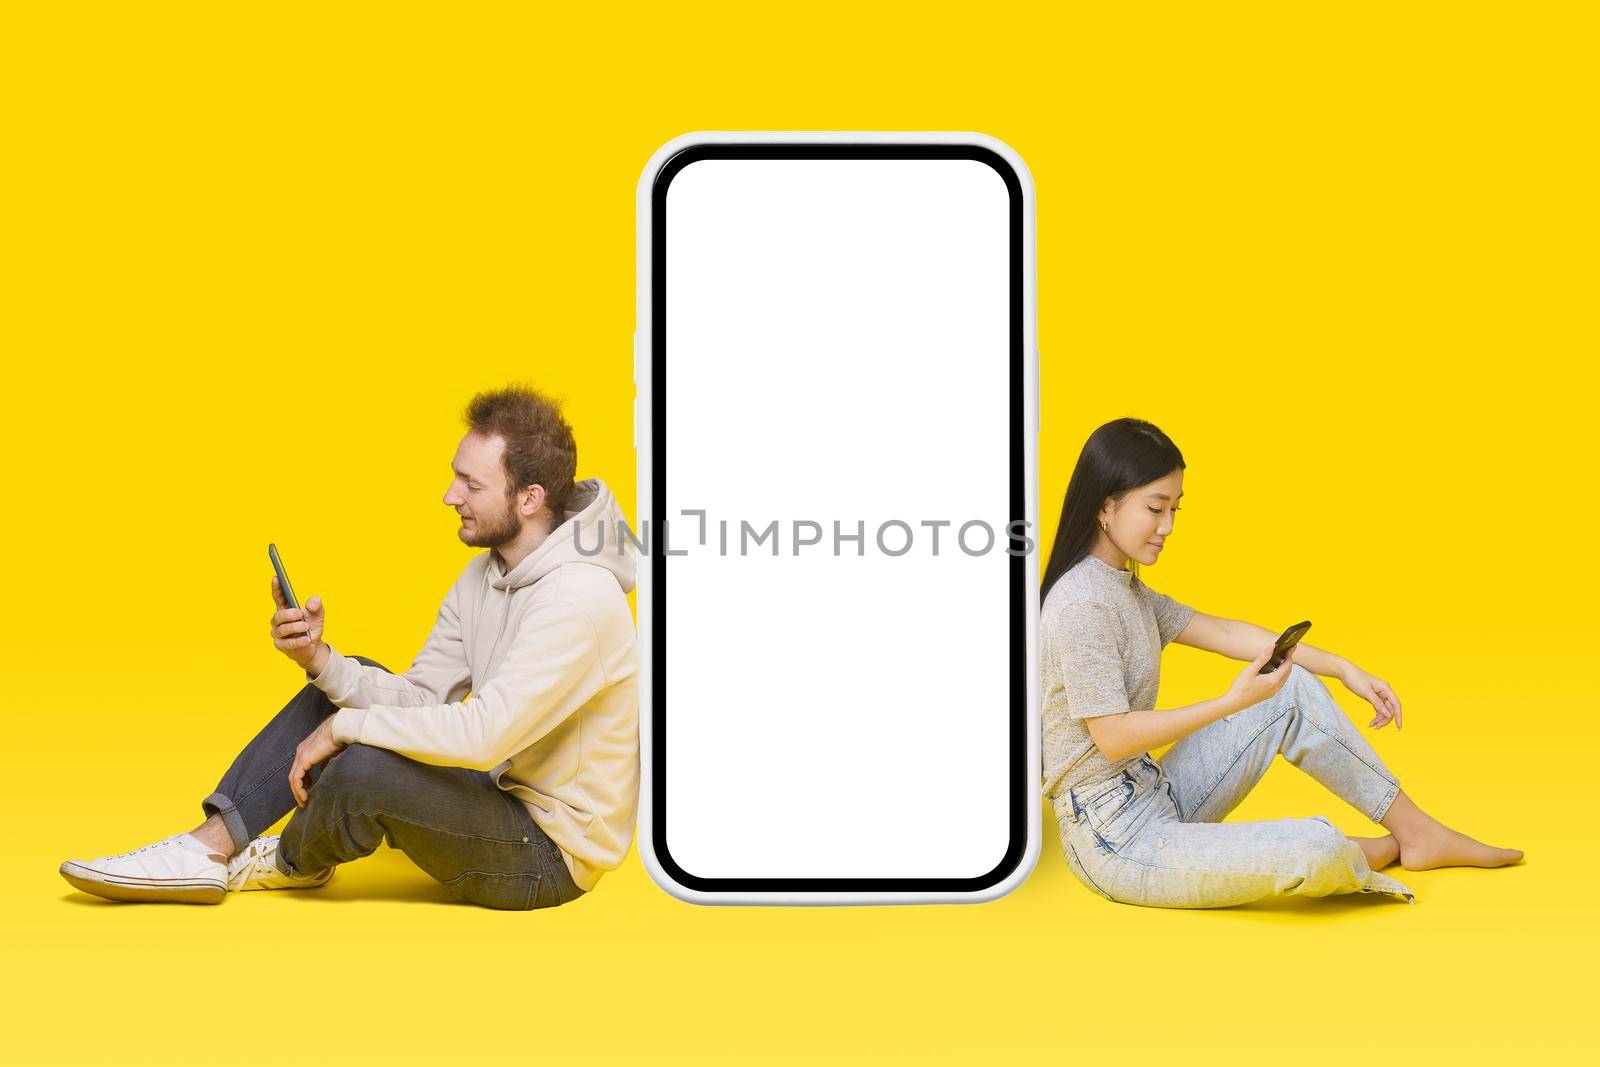 Caucasian guy and asian girl sitting on floor with phones in hands leaned on huge, giant smartphone blank white screen, mobile app advertisement isolated on yellow. Product placement.